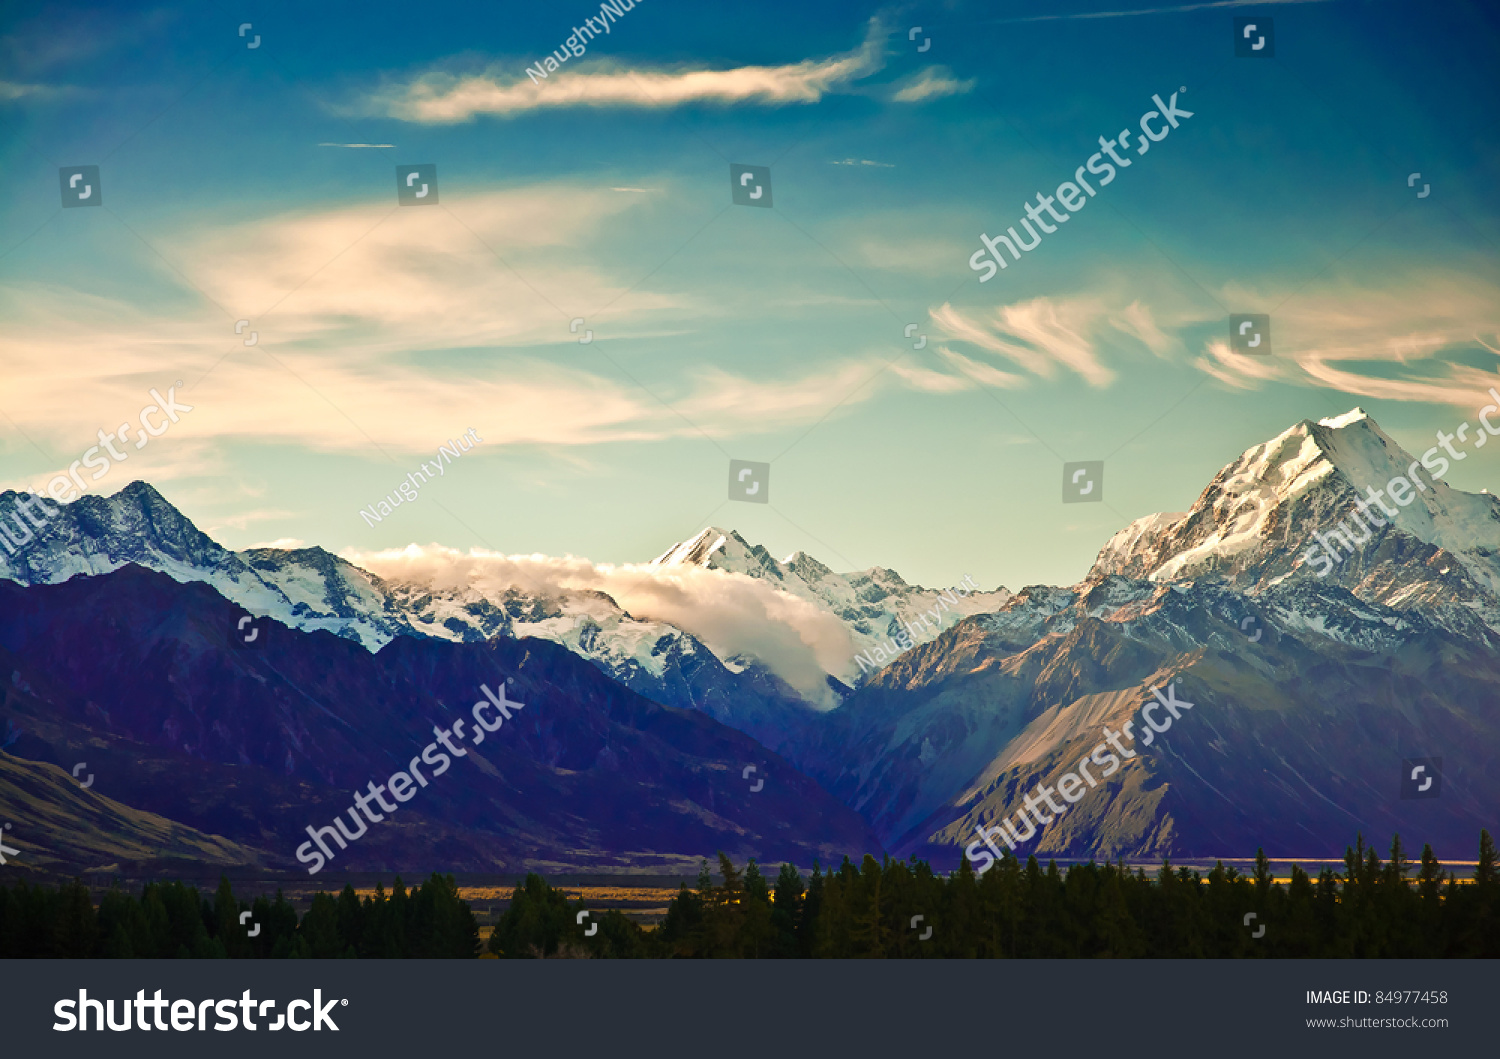 New Zealand scenic mountain landscape shot at Mount Cook National Park. #84977458